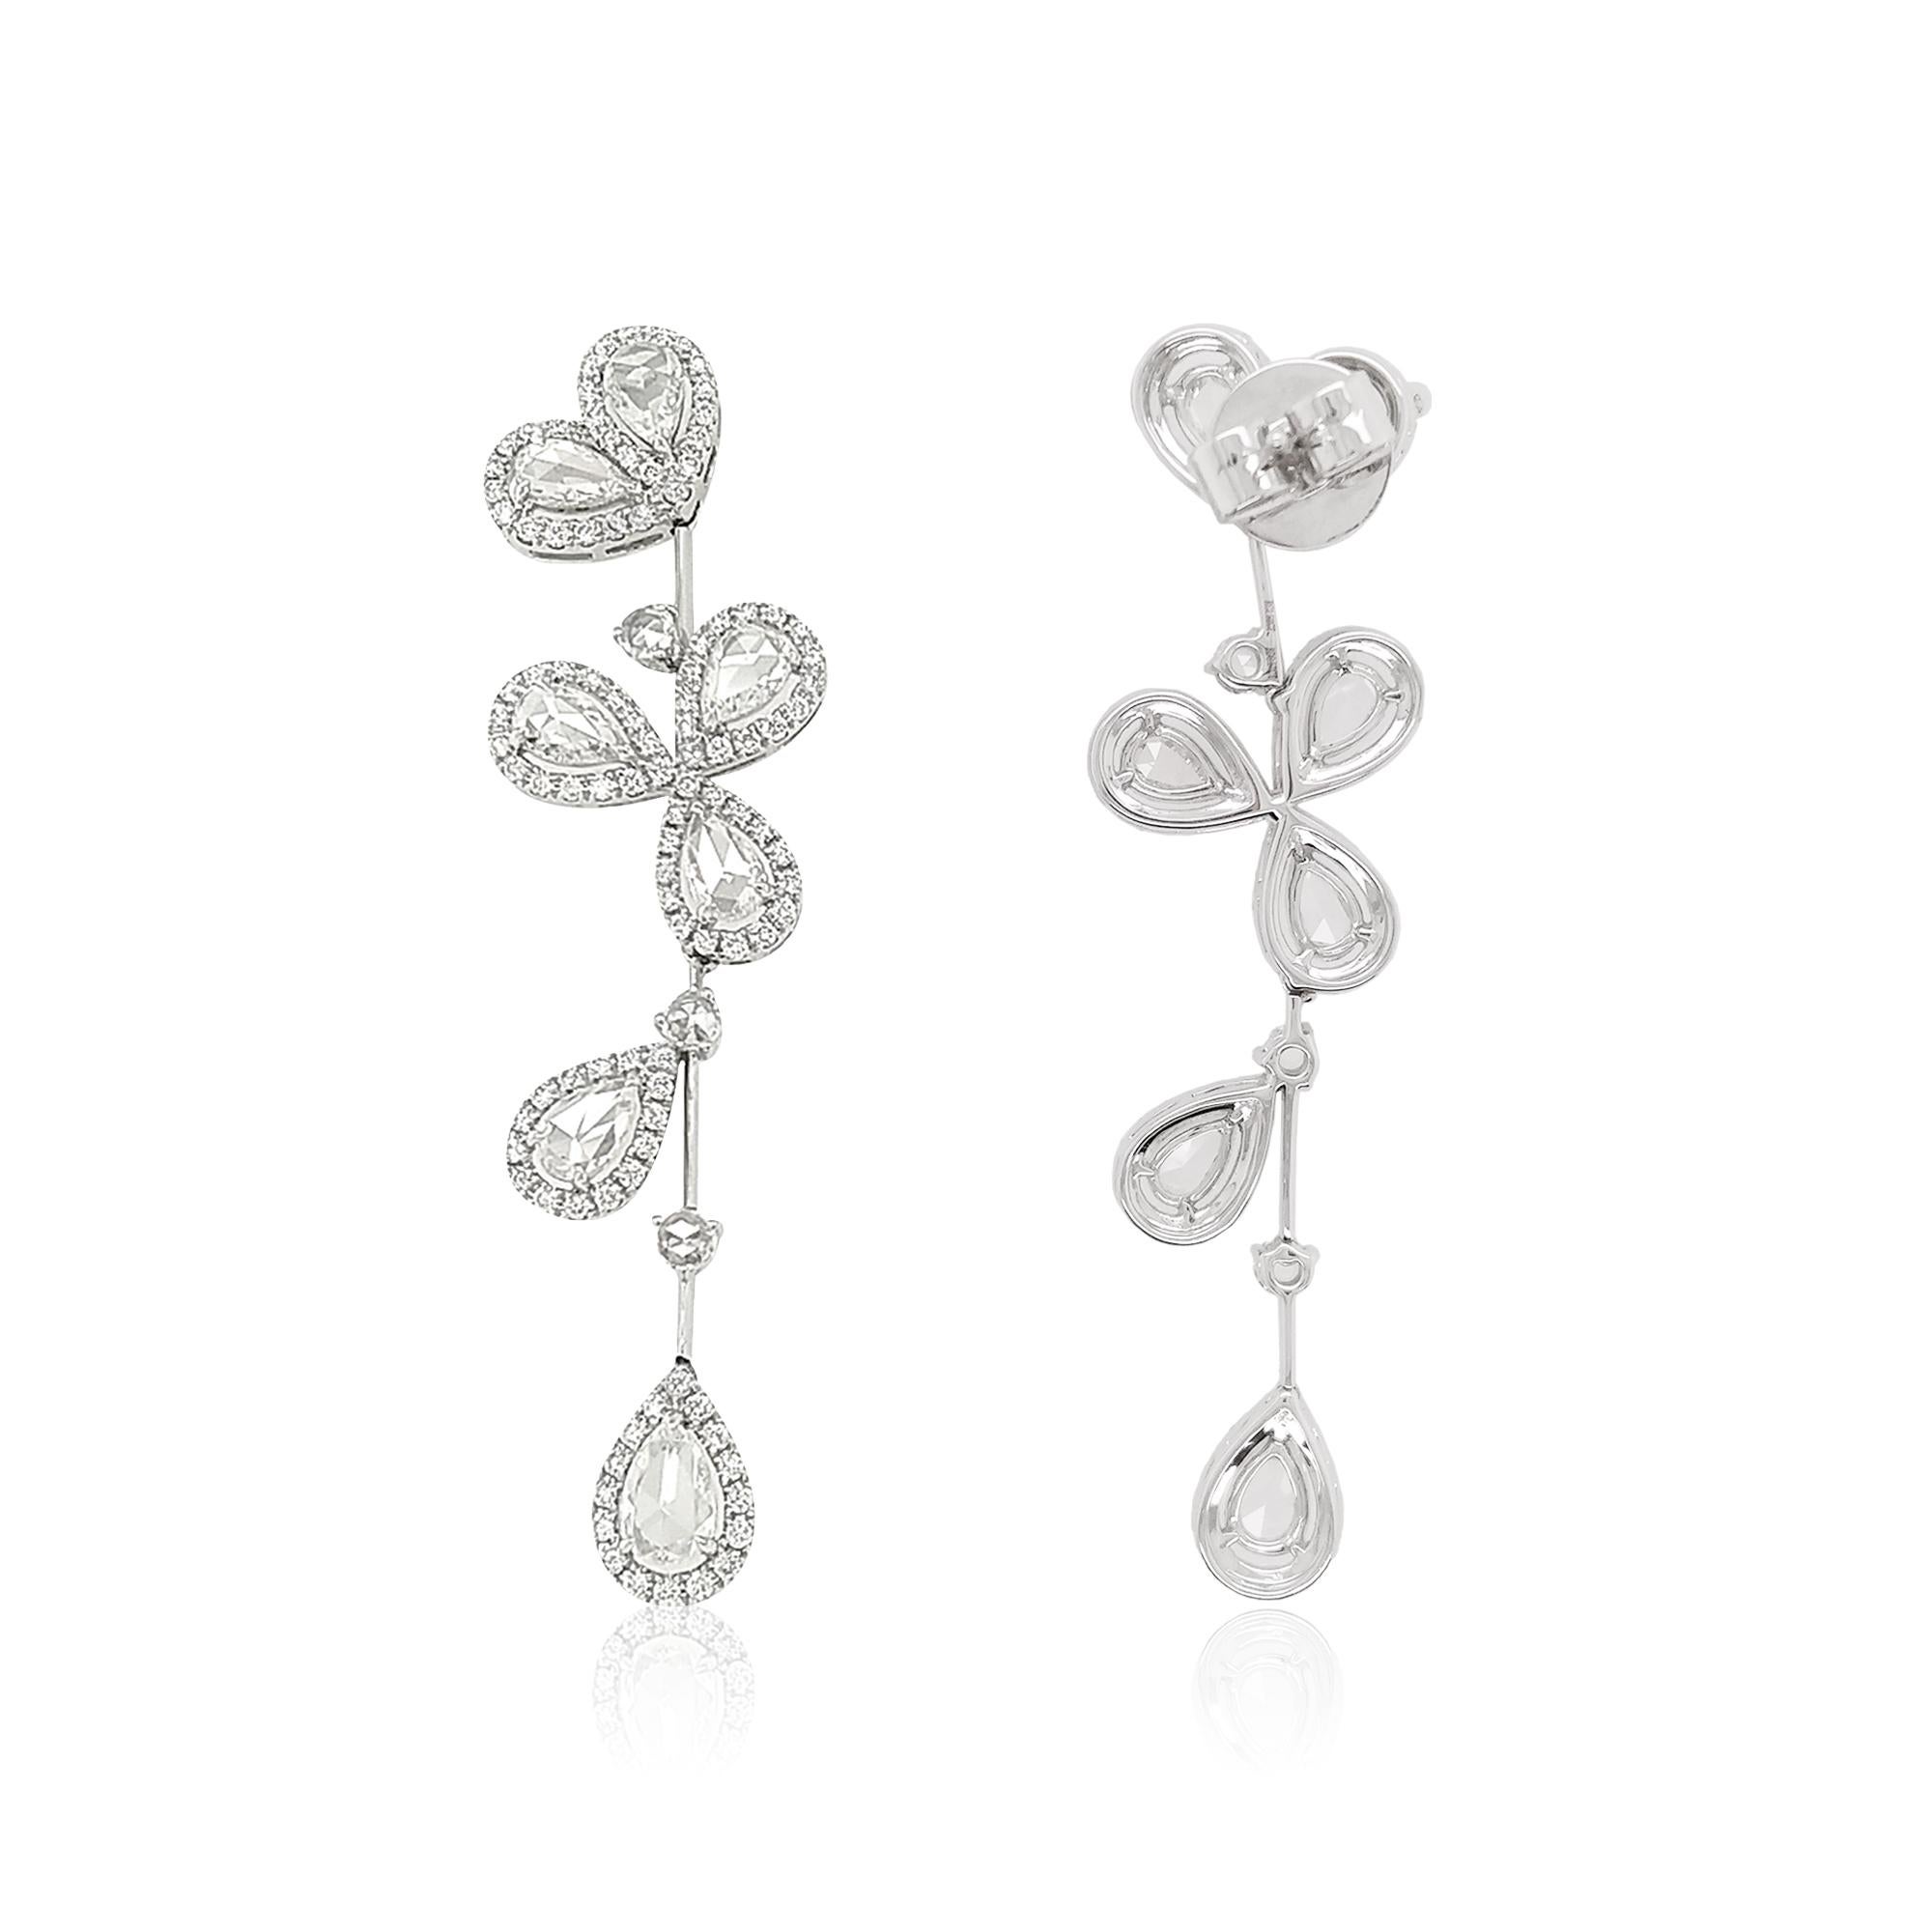 These pretty earrings showcase feminine Rose Cut White Diamonds showcased in halos of Brilliant Cut White Diamonds that cascade down the earring. These beautiful earrings are sure to be noticed, whichever way you choose to style them. 
-	Pear Shape